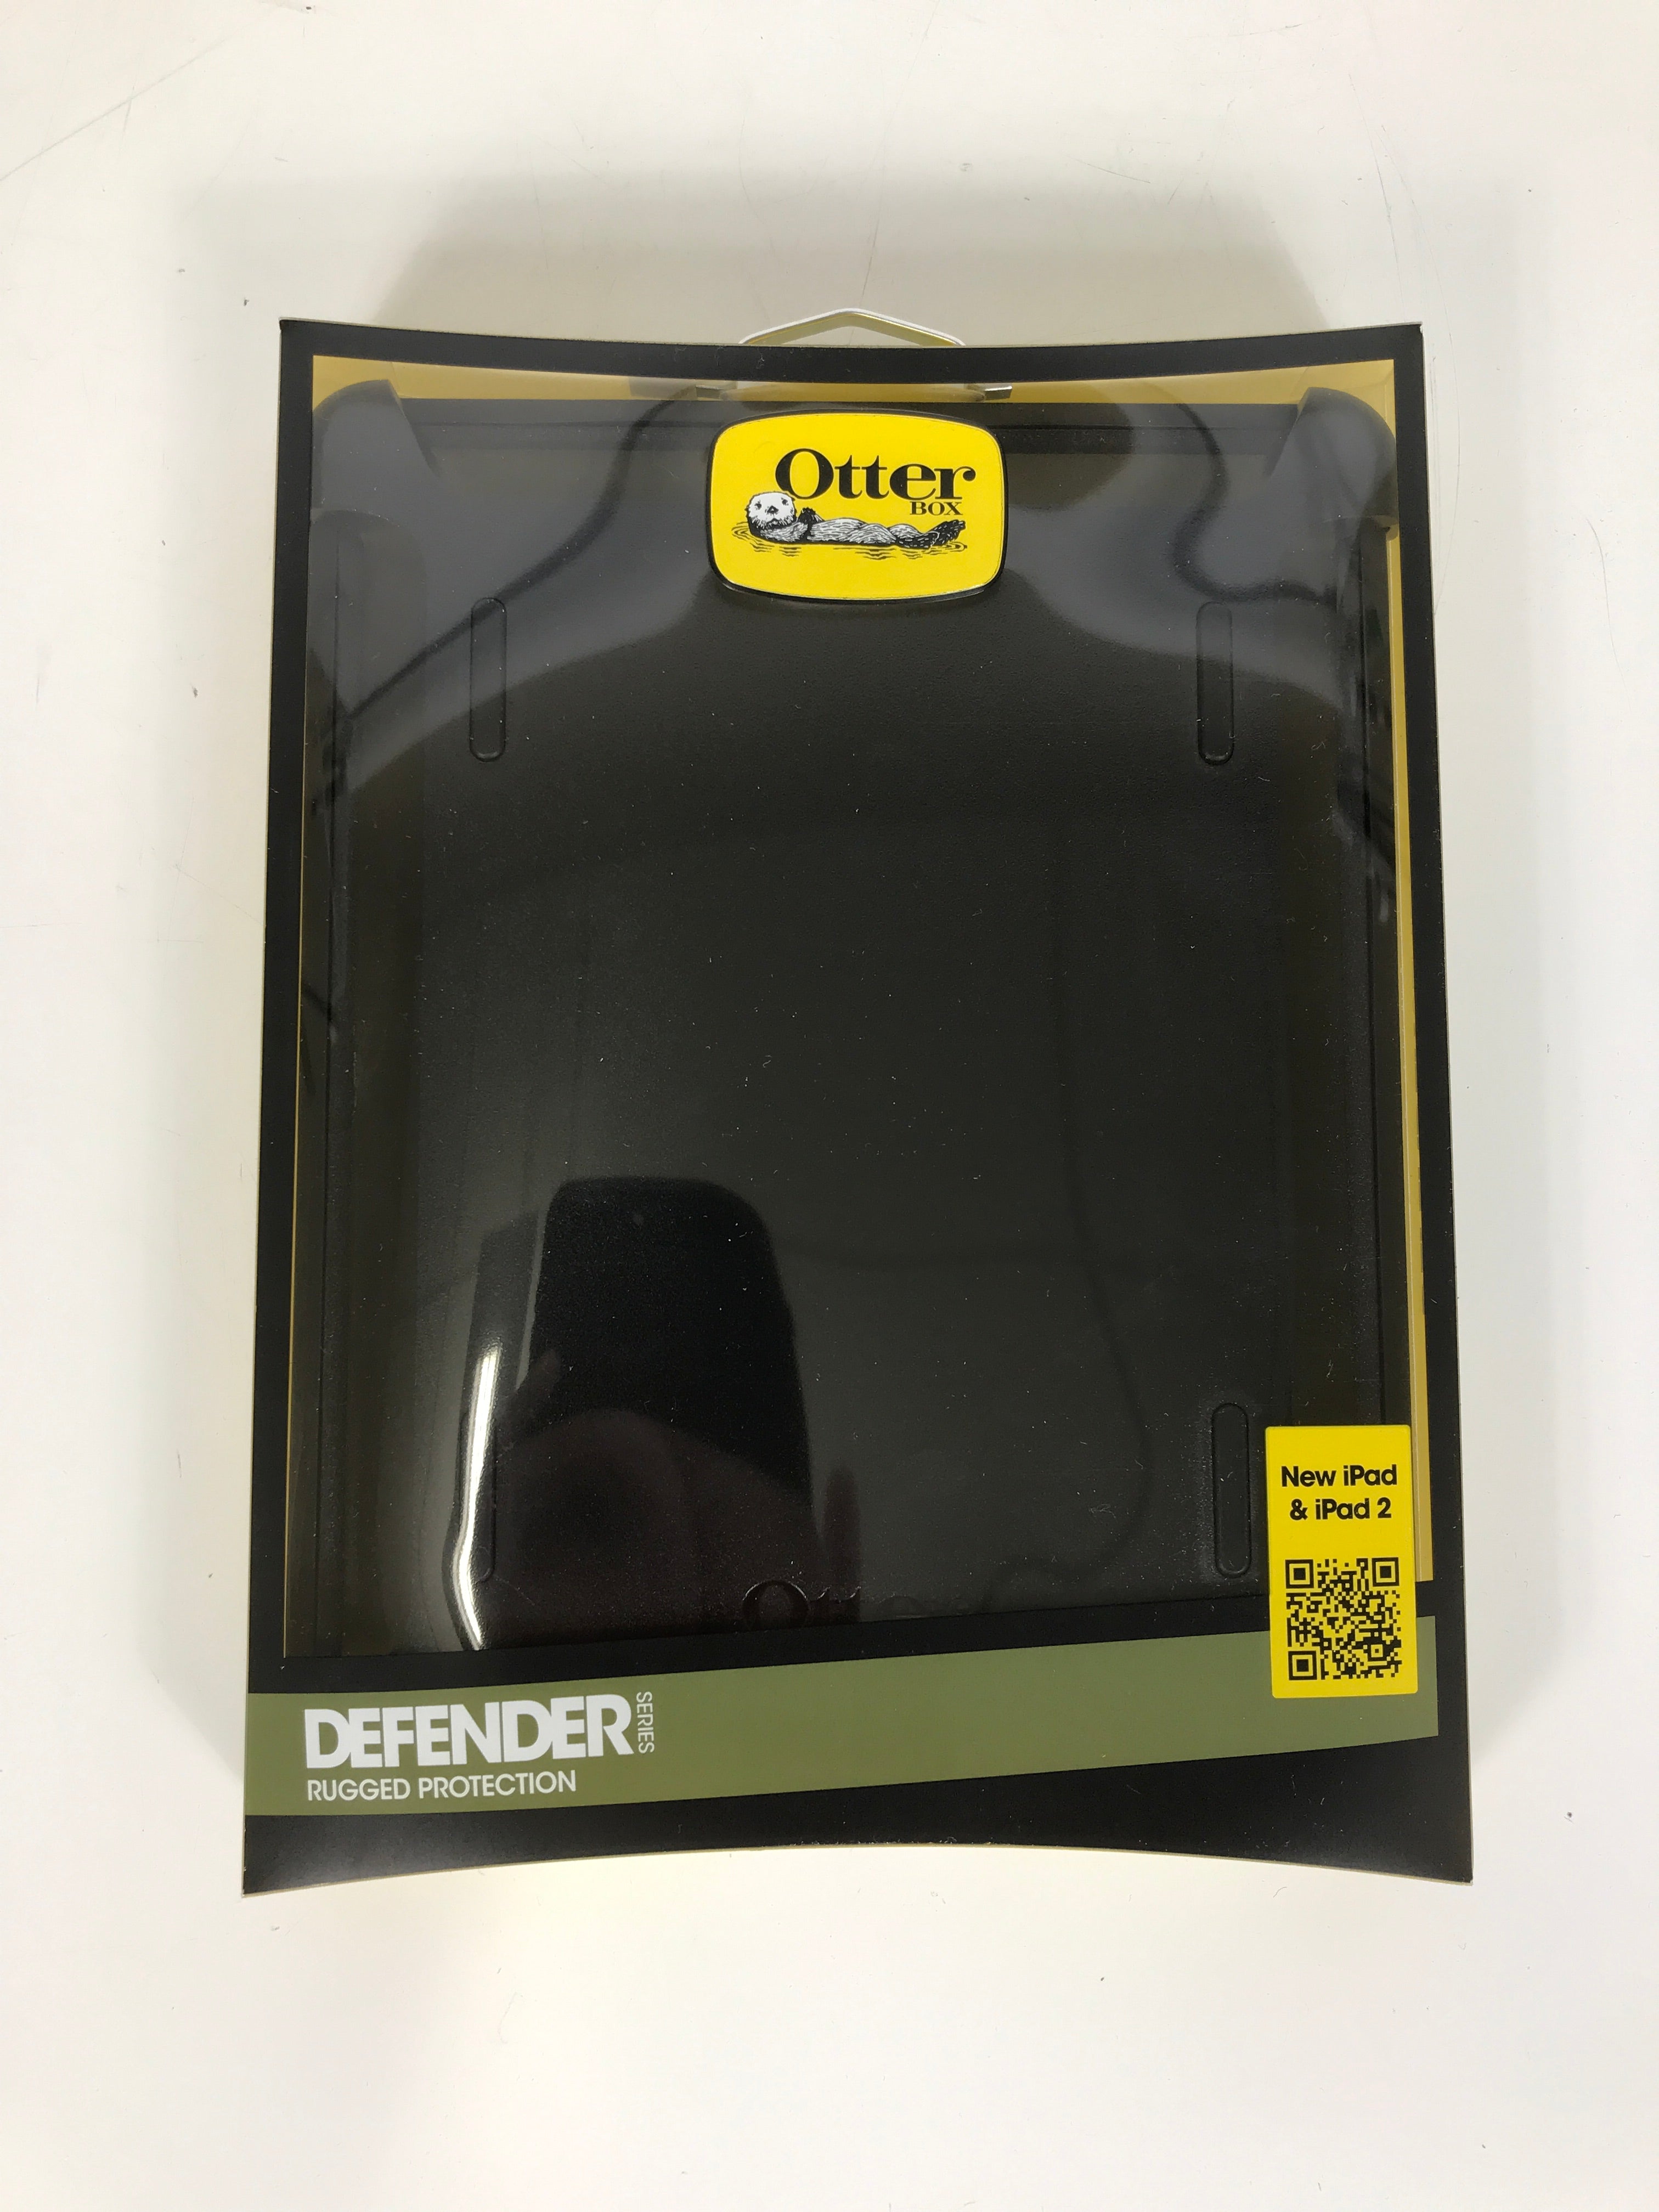 OtterBox Defender Series Rugged Case for iPad and iPad 2 *New*